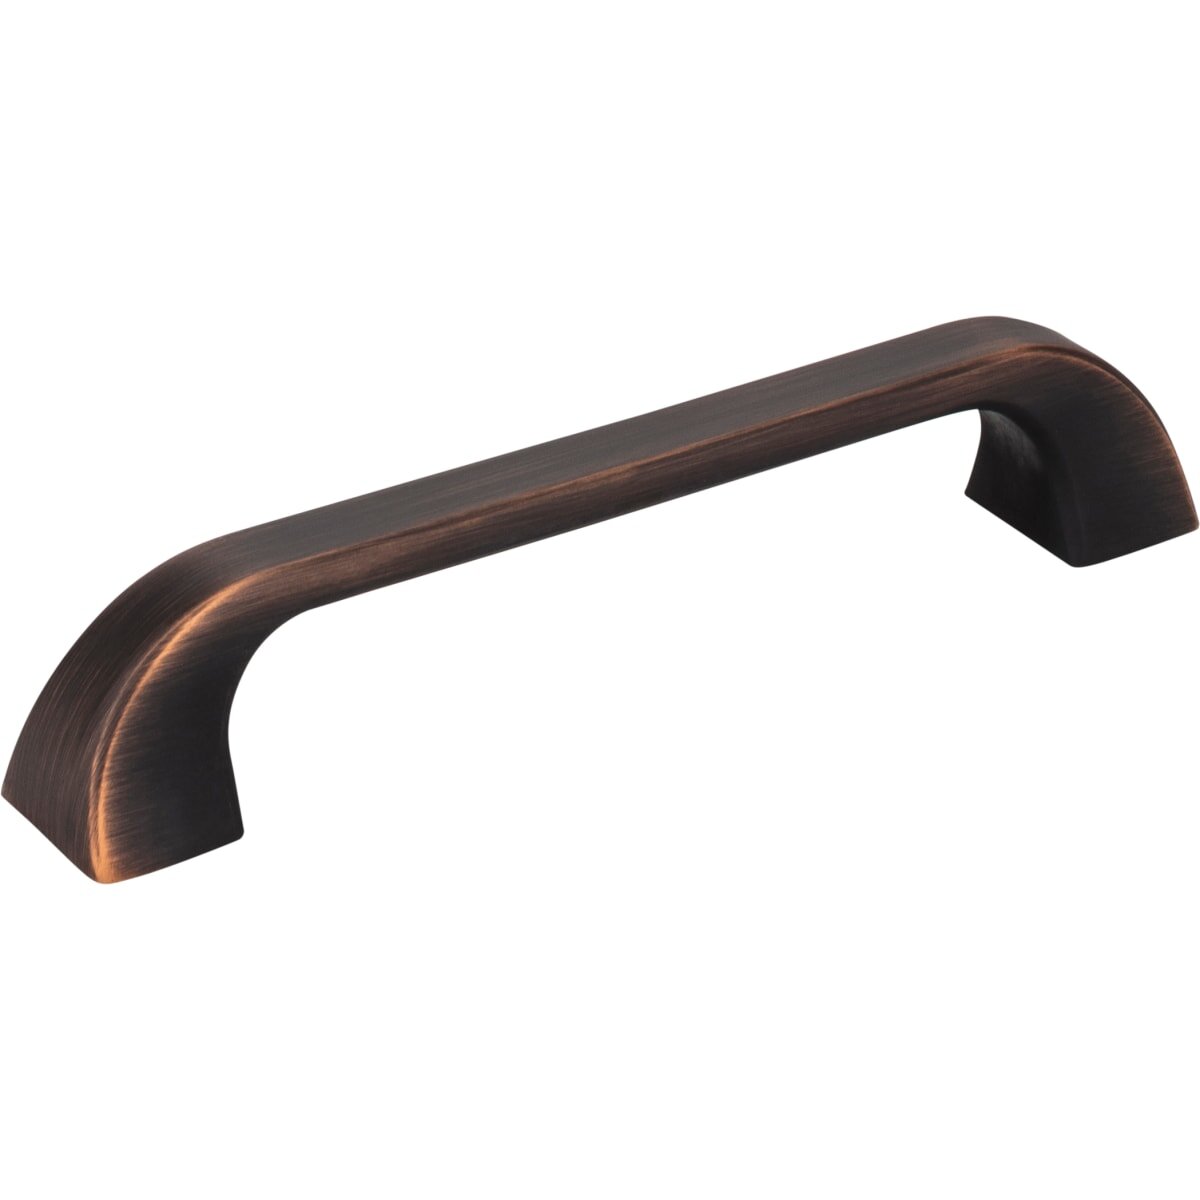 Marlo Brushed Oil rubbed bronze